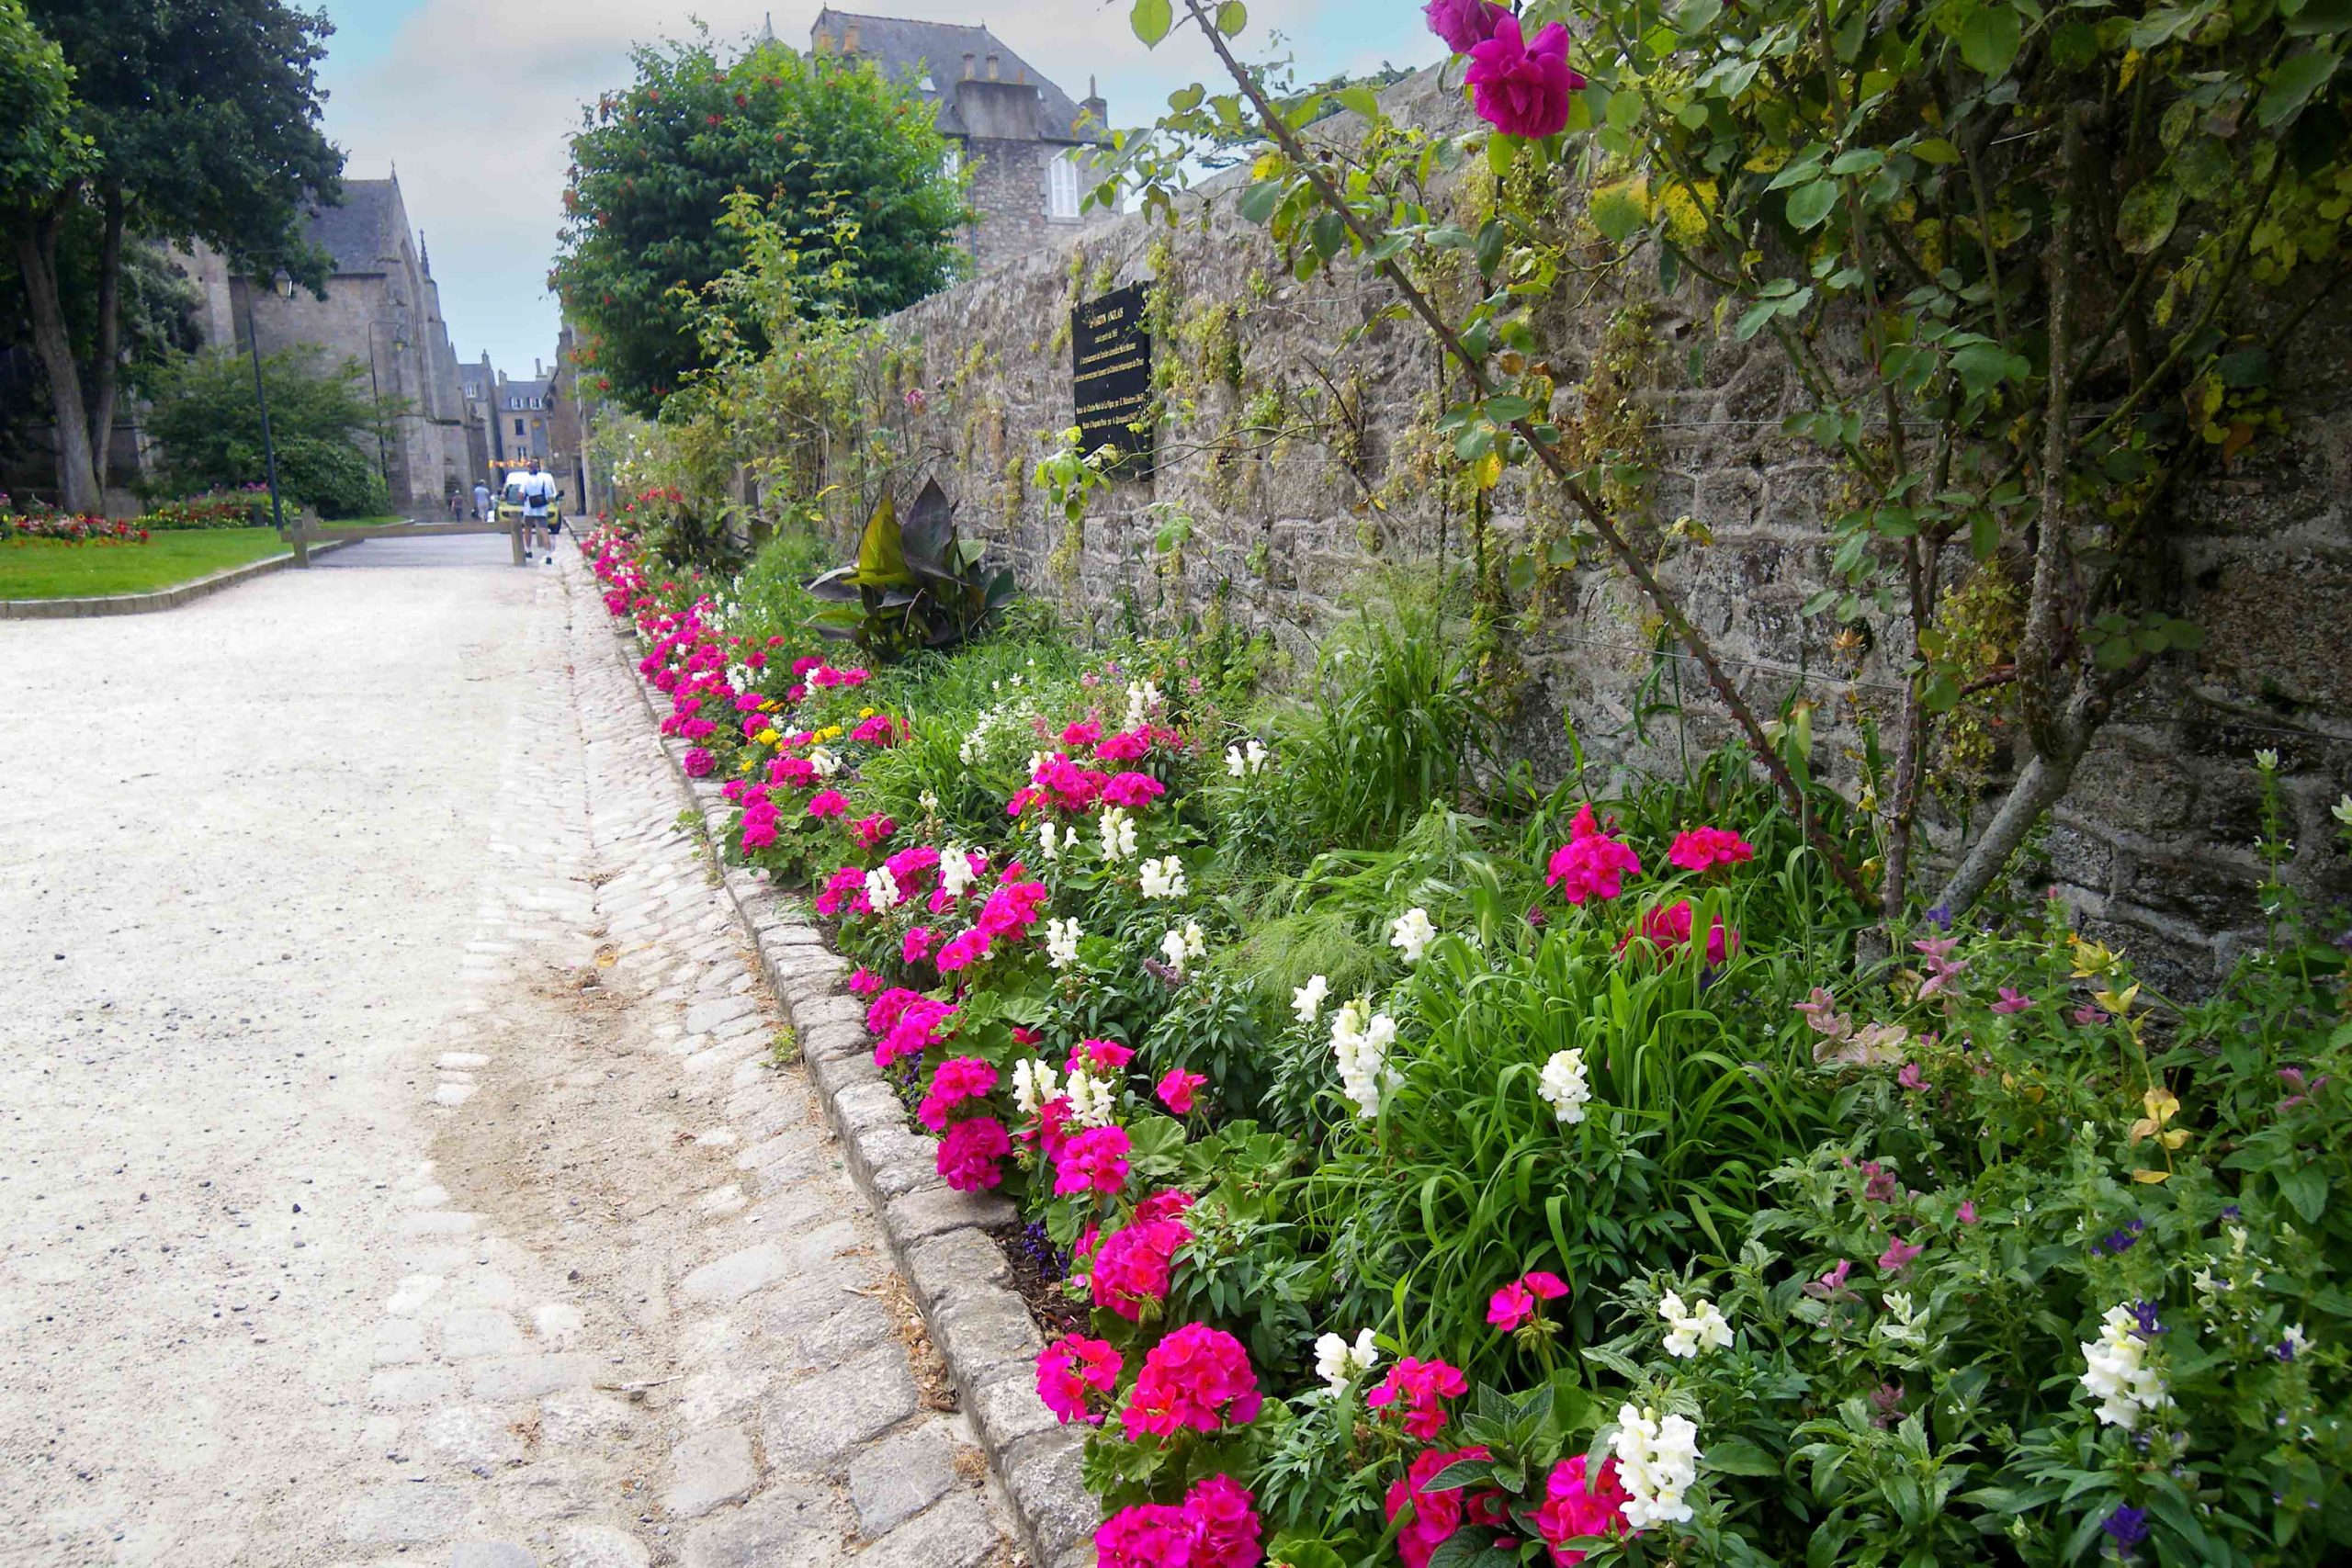 Explore Dinan - Jardin Anglais © chisloup - licence [CC BY 3.0] from Wikimedia Commons